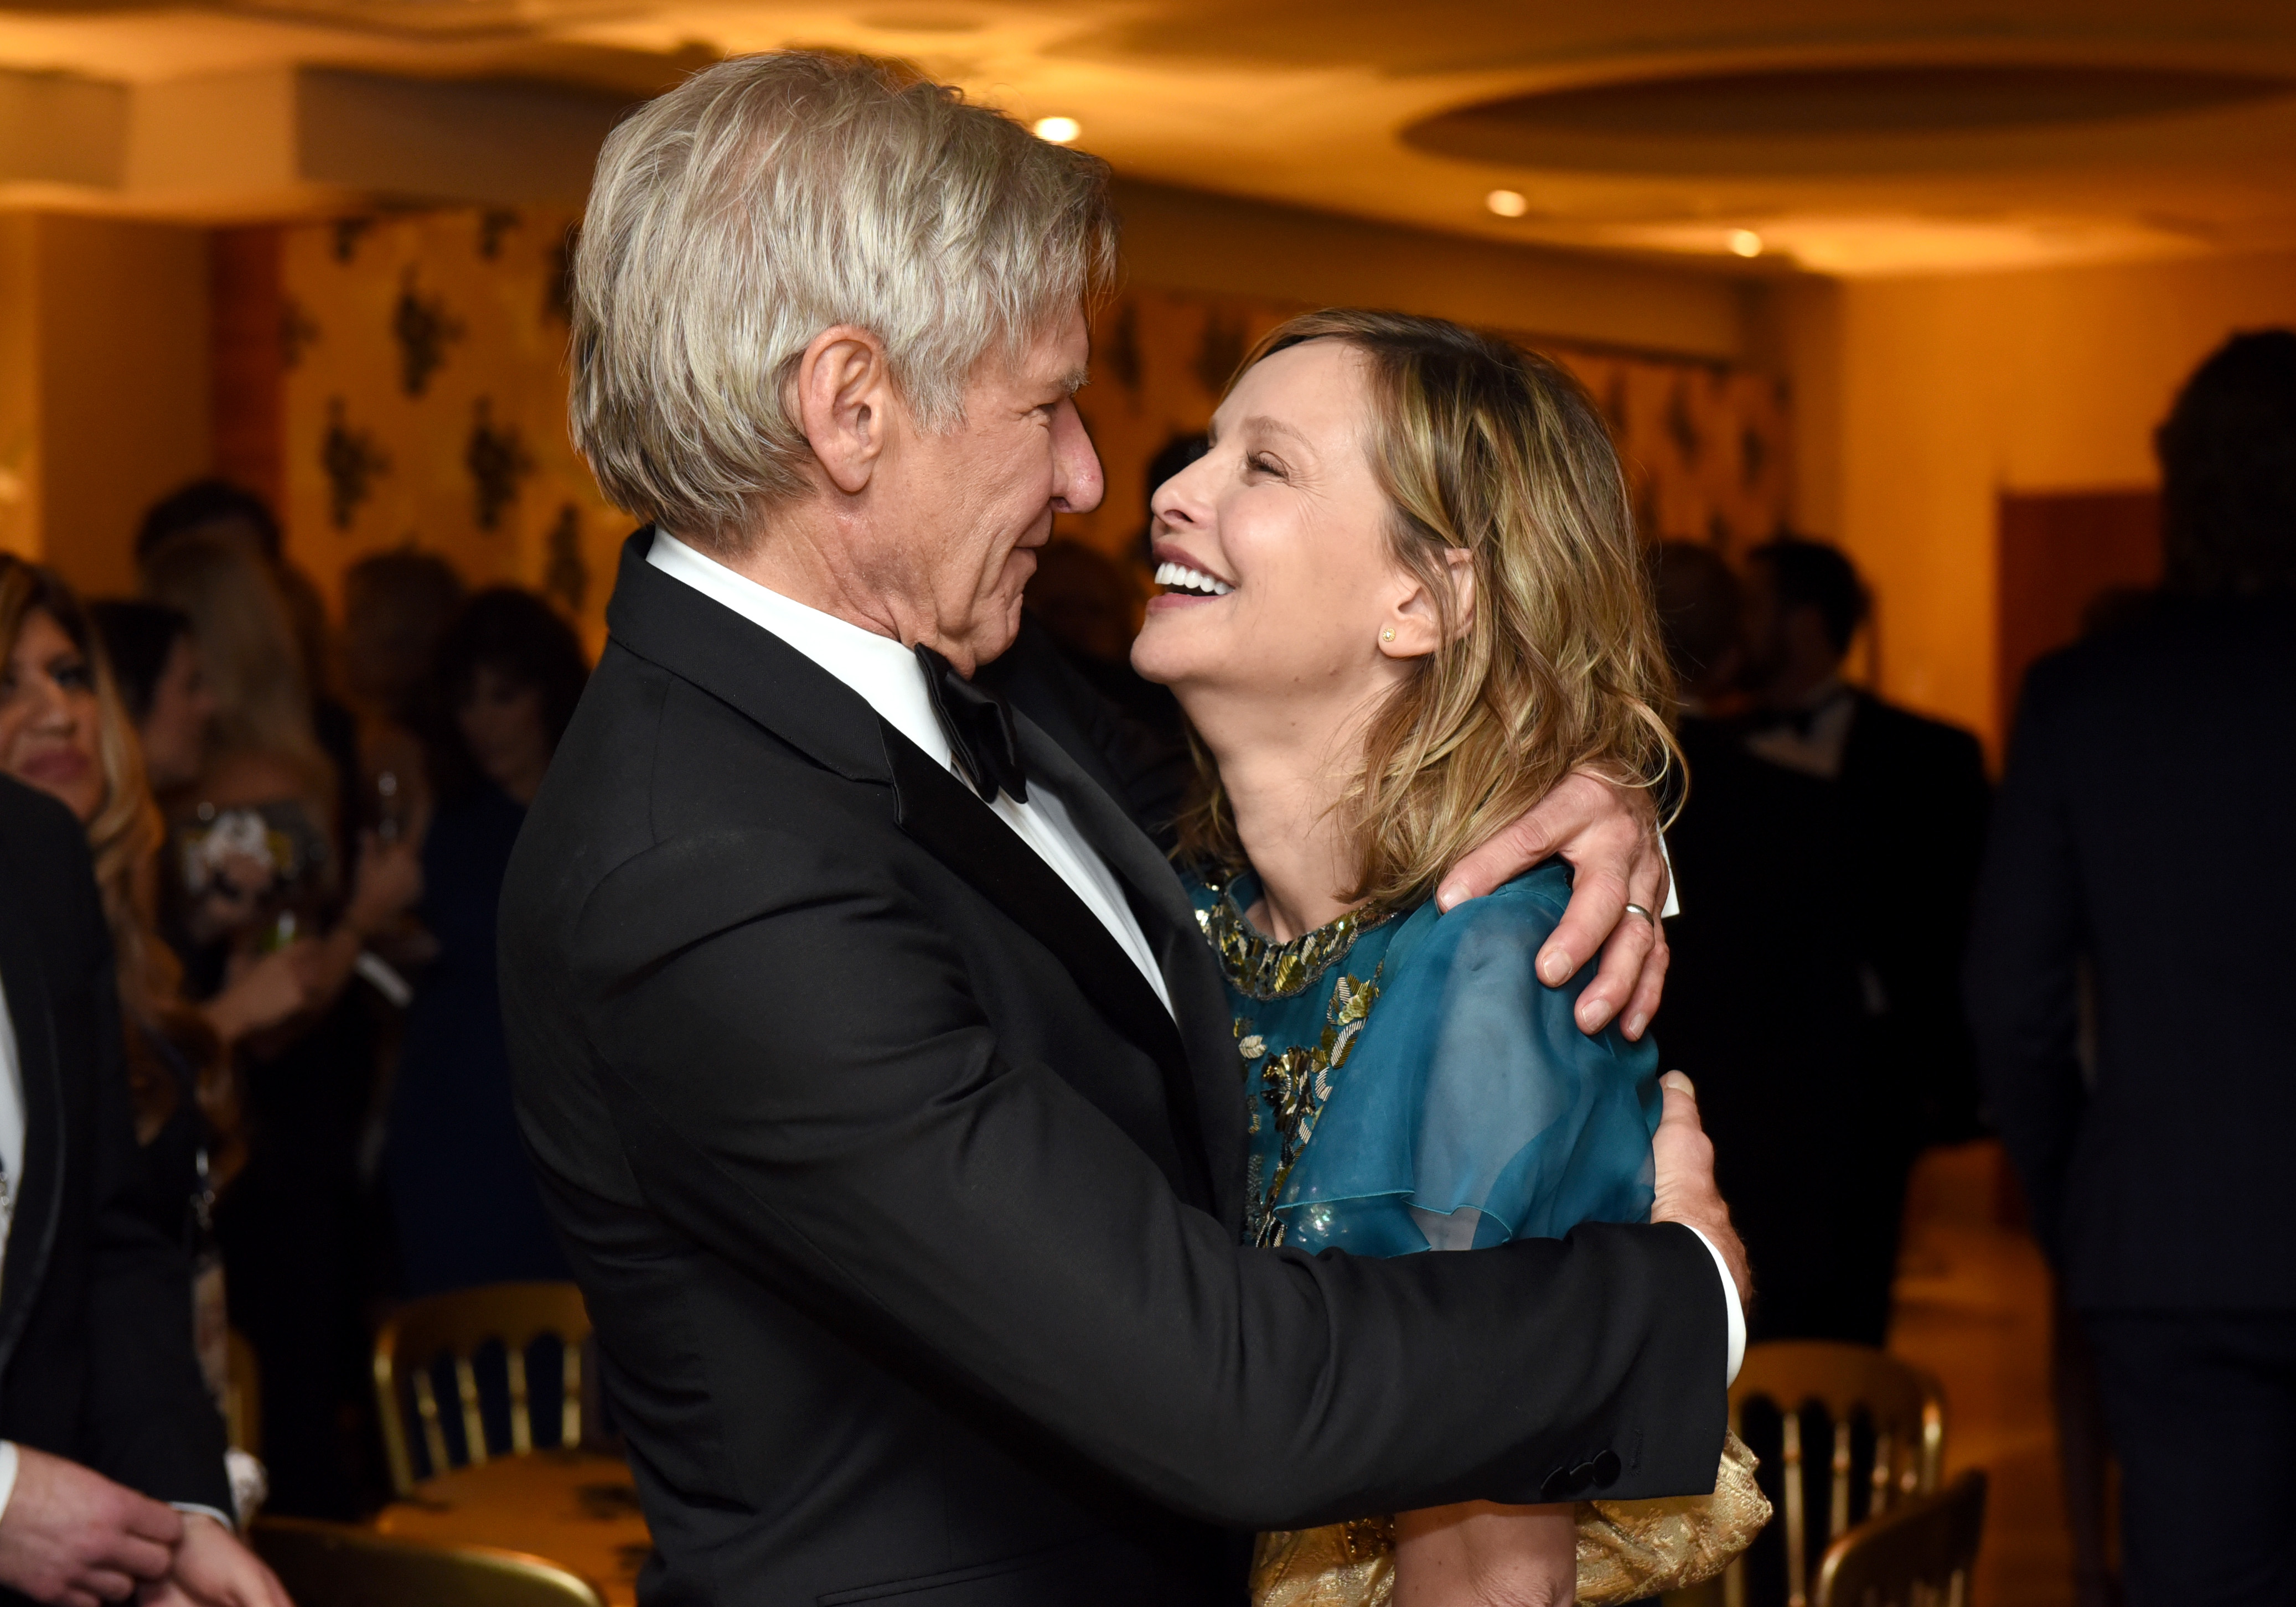 Harrison Ford and Calista Flockhart at the Golden Globe Awards After Party in Beverly Hills, California on January 10, 2016 | Source: Getty Images